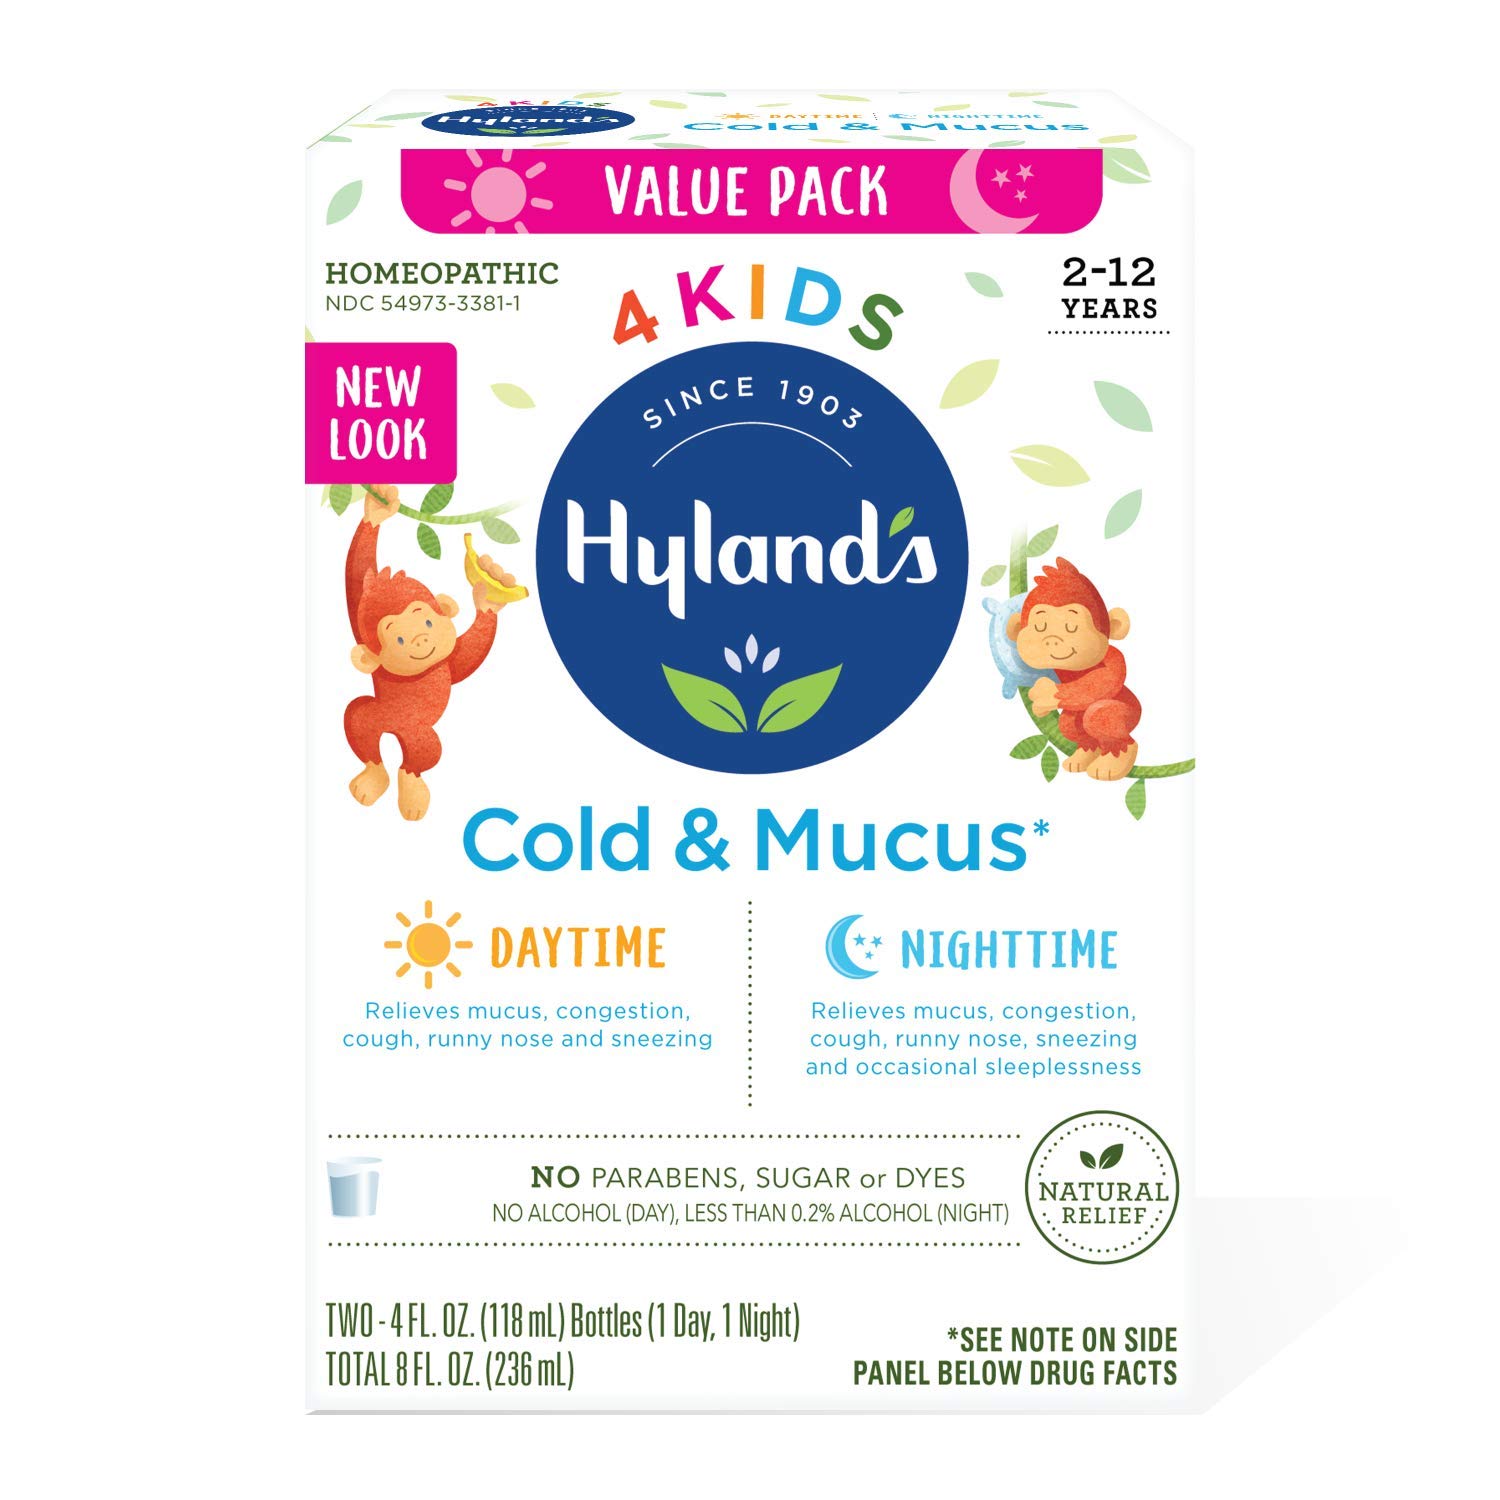 Kids Cold Medicine and Mucus Relief for Ages 2+, Hylands 4 Kids Cold 'n Mucus, Day and Night Value Pack, Syrup Cough Medicine for Kids, Nasal Decongestant and Allergy Relief, 4 Fl Oz Each